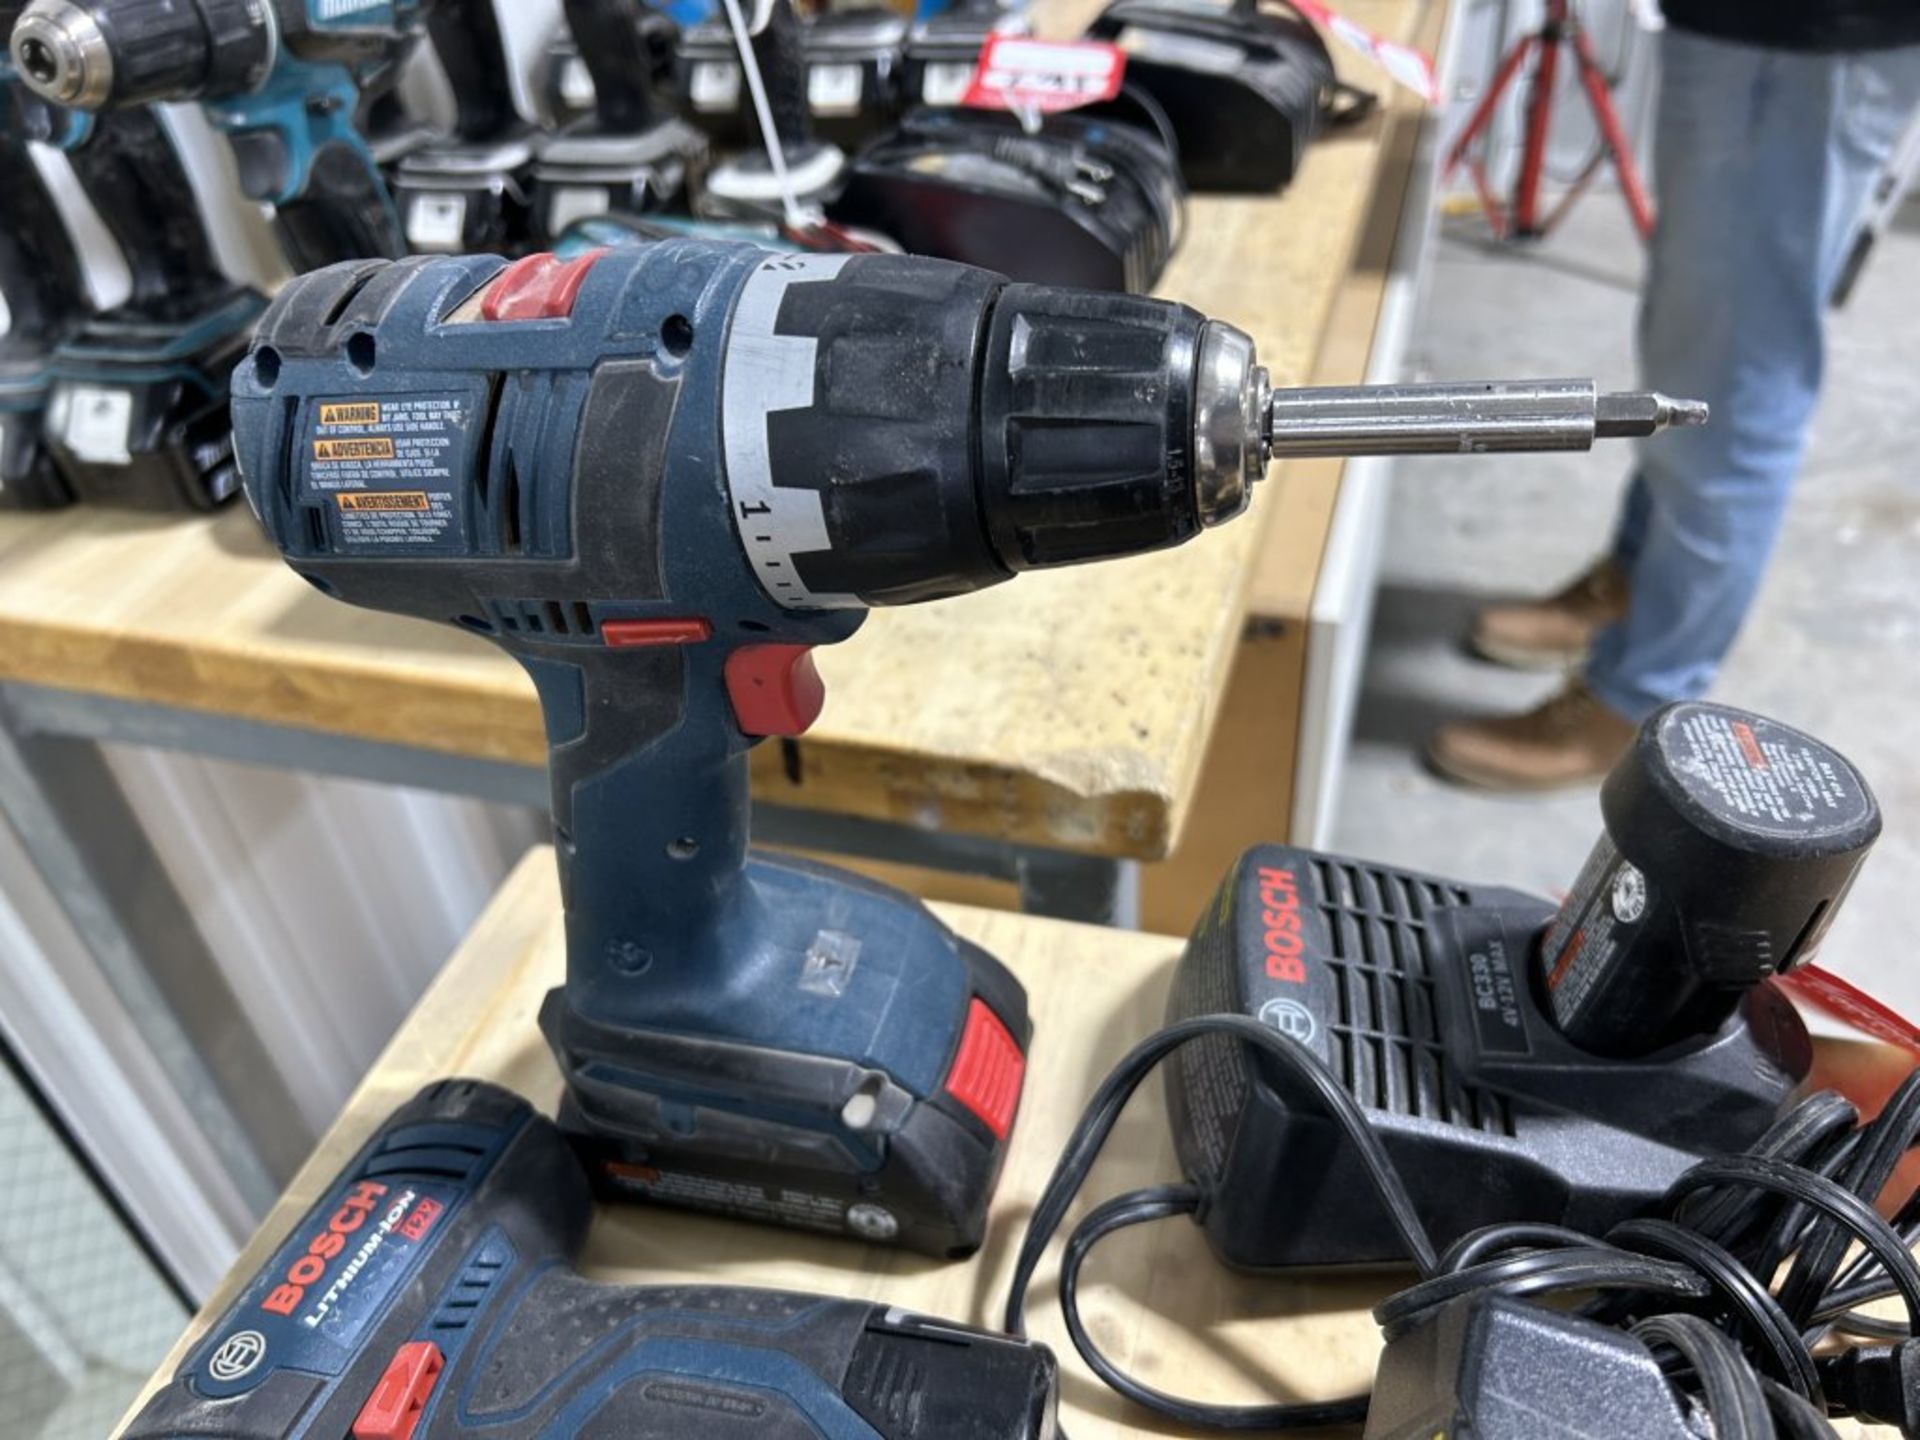 BOSCH LITHIUM ION 18V & 12V CORDLESS DRILLS, EACH WITH 2 BATTERIES AND CHARGER - Bild 2 aus 3